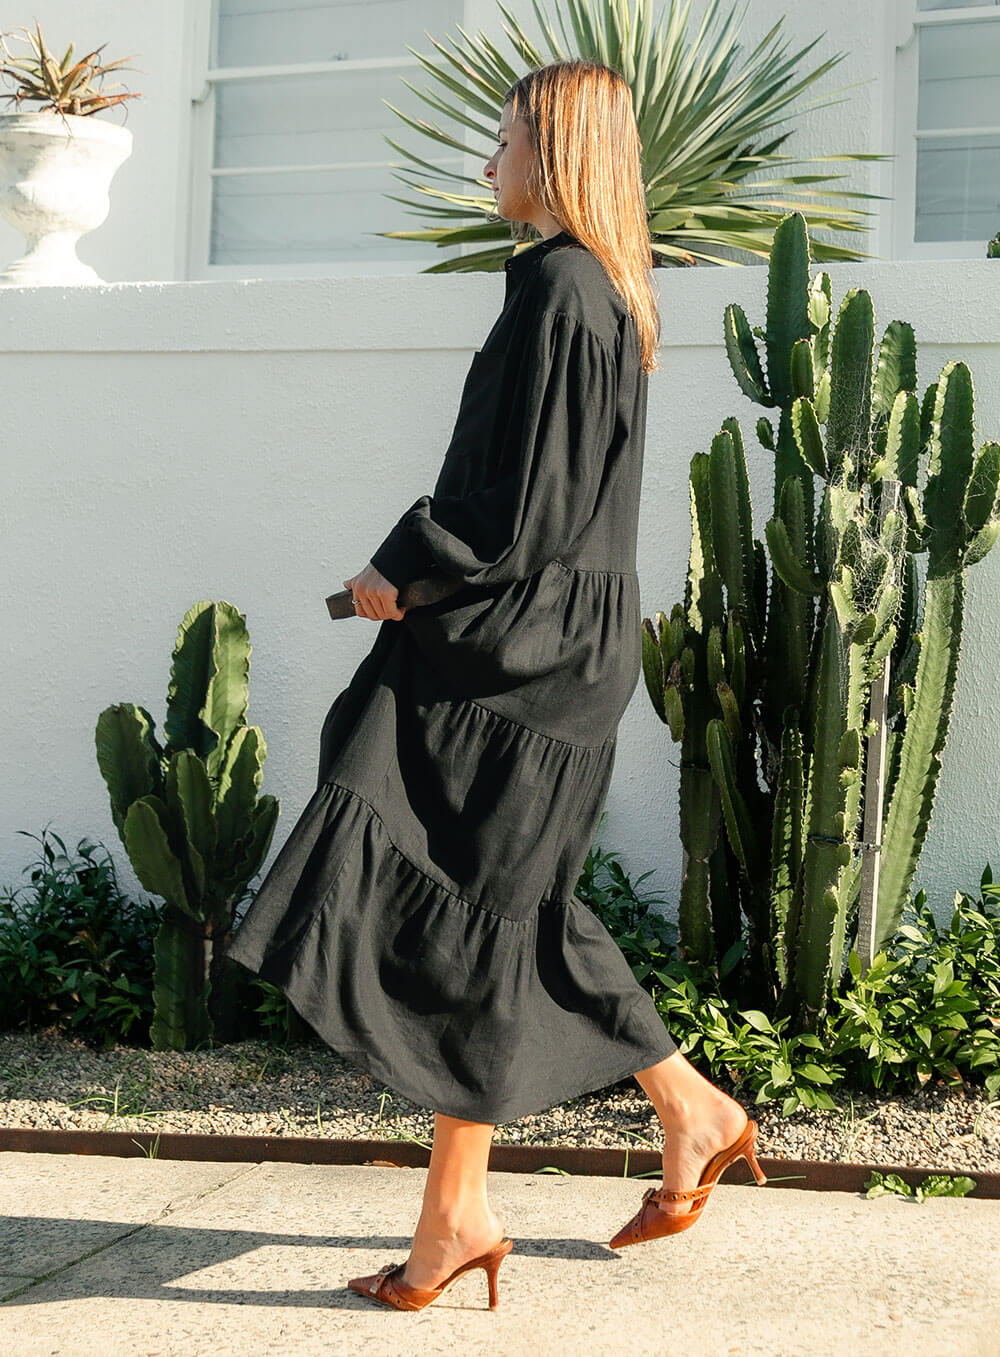 The Daisy Linen Midi Dress in black is made from 100% linen, It's overised layers drape over the body flowing effortlessly.